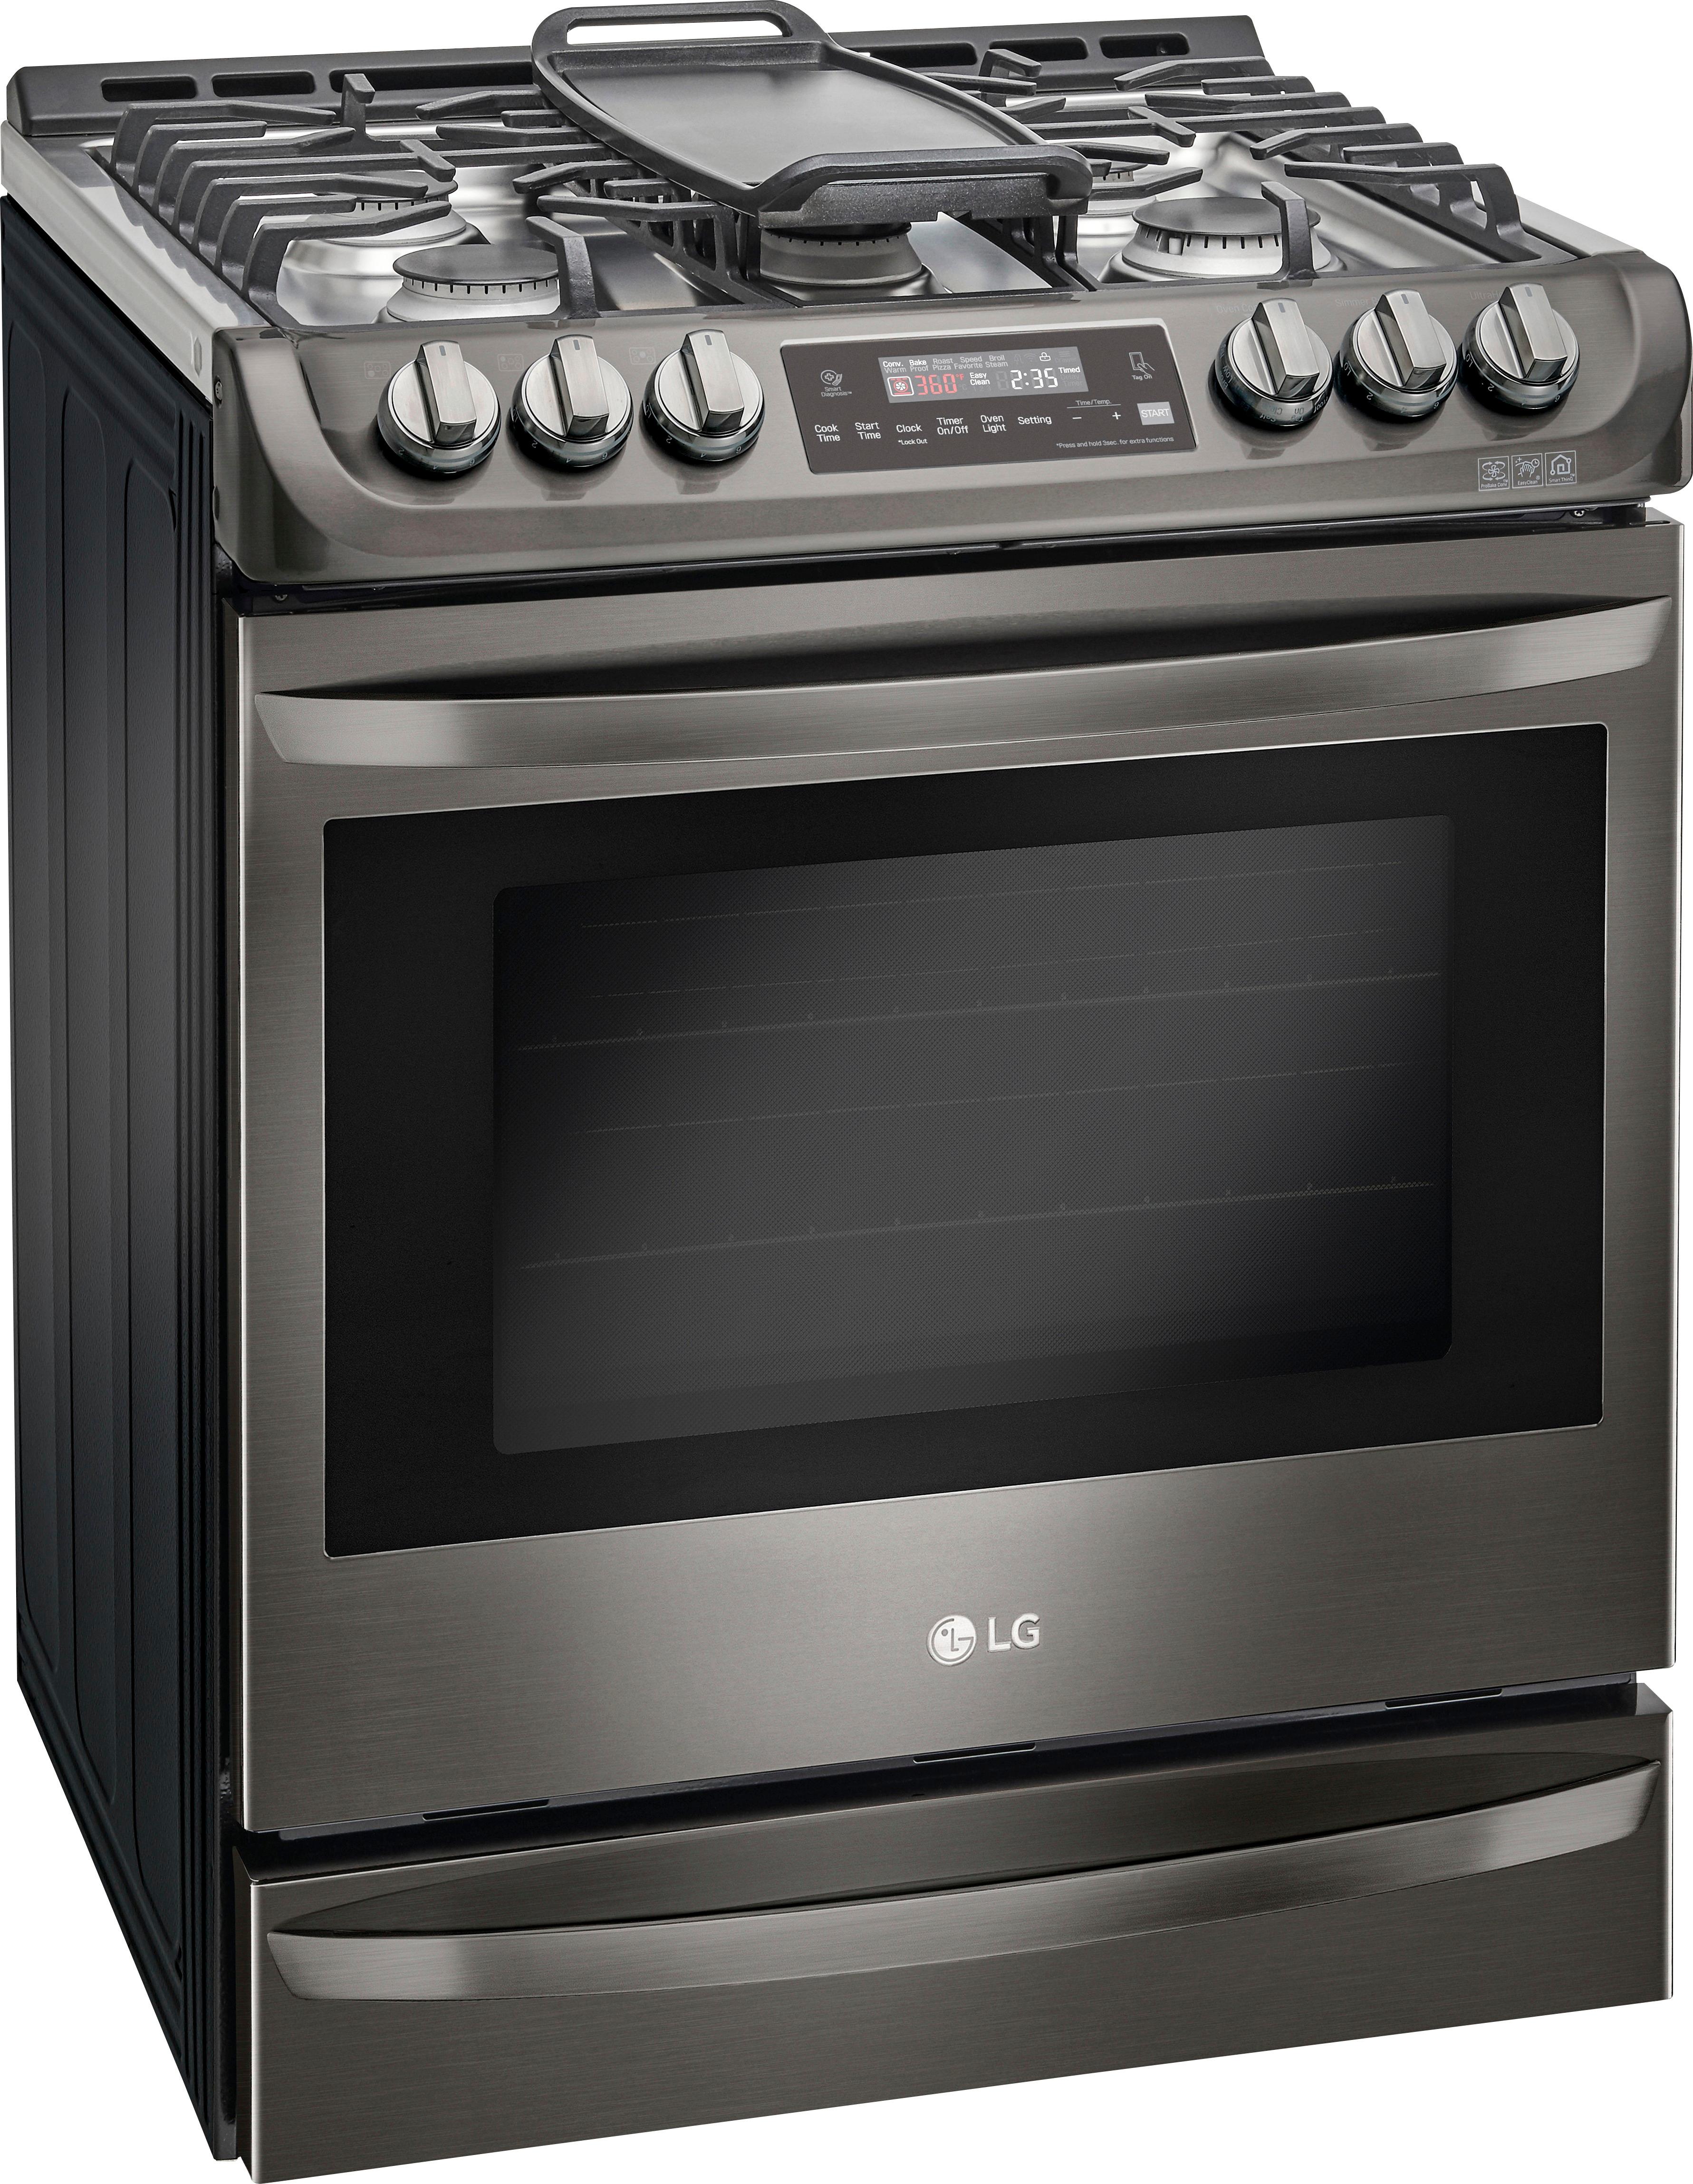 Angle View: GE - 4.8 Cu. Ft. Freestanding Gas Range - Stainless Steel